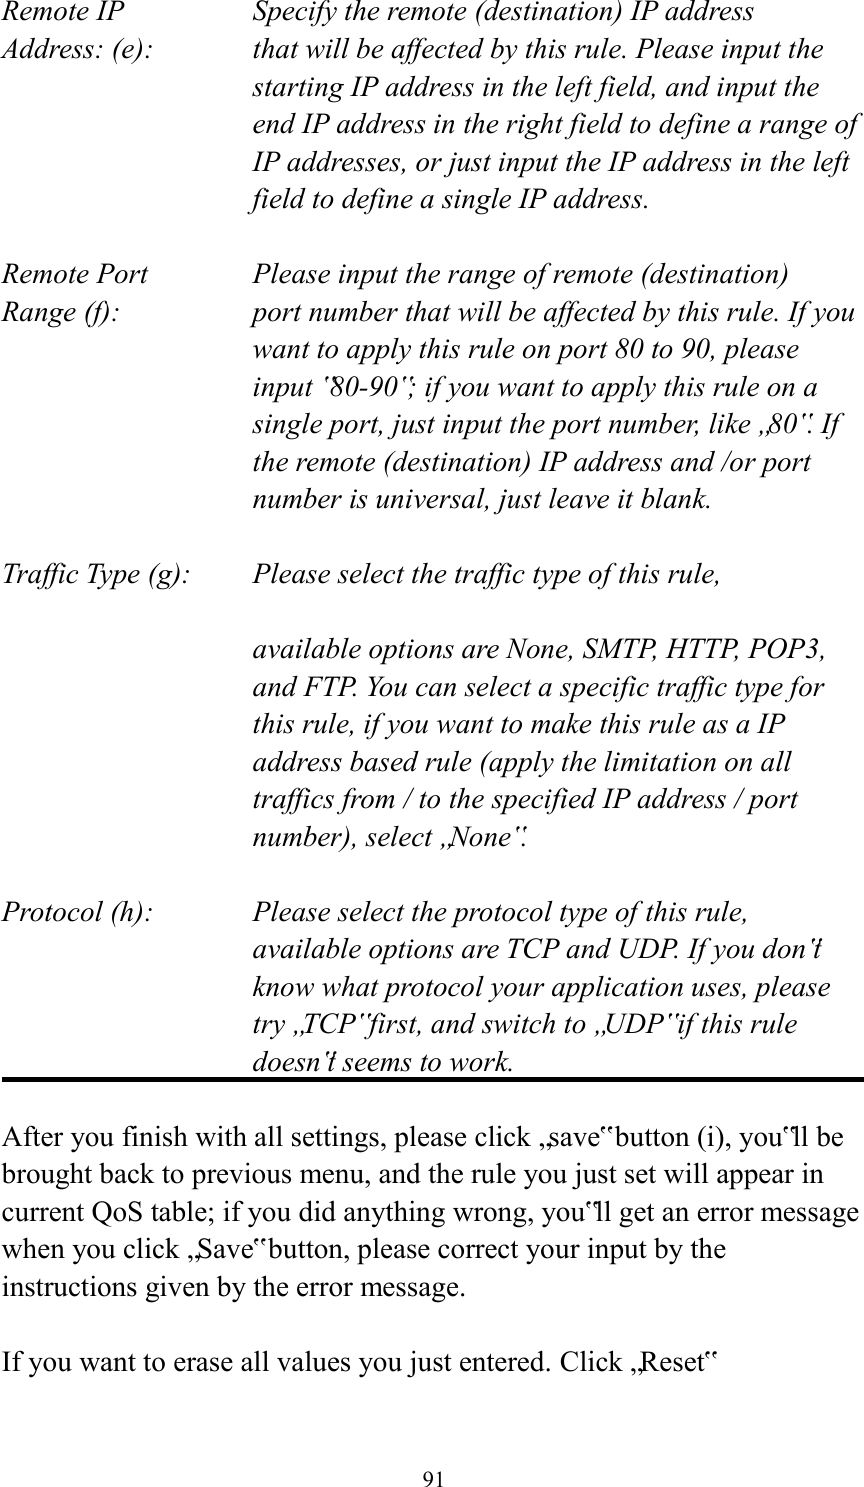  91 Remote IP        Specify the remote (destination) IP address Address: (e):    that will be affected by this rule. Please input the starting IP address in the left field, and input the end IP address in the right field to define a range of IP addresses, or just input the IP address in the left field to define a single IP address.  Remote Port      Please input the range of remote (destination) Range (f):  port number that will be affected by this rule. If you want to apply this rule on port 80 to 90, please input ‟80-90‟; if you want to apply this rule on a single port, just input the port number, like „80‟. If the remote (destination) IP address and /or port number is universal, just leave it blank.  Traffic Type (g):    Please select the traffic type of this rule,  available options are None, SMTP, HTTP, POP3, and FTP. You can select a specific traffic type for this rule, if you want to make this rule as a IP address based rule (apply the limitation on all traffics from / to the specified IP address / port number), select „None‟.  Protocol (h):      Please select the protocol type of this rule,   available options are TCP and UDP. If you don‟t know what protocol your application uses, please try „TCP‟ first, and switch to „UDP‟ if this rule doesn‟t seems to work.  After you finish with all settings, please click „save‟ button (i), you‟ll be brought back to previous menu, and the rule you just set will appear in current QoS table; if you did anything wrong, you‟ll get an error message when you click „Save‟ button, please correct your input by the instructions given by the error message.  If you want to erase all values you just entered. Click „Reset‟ 